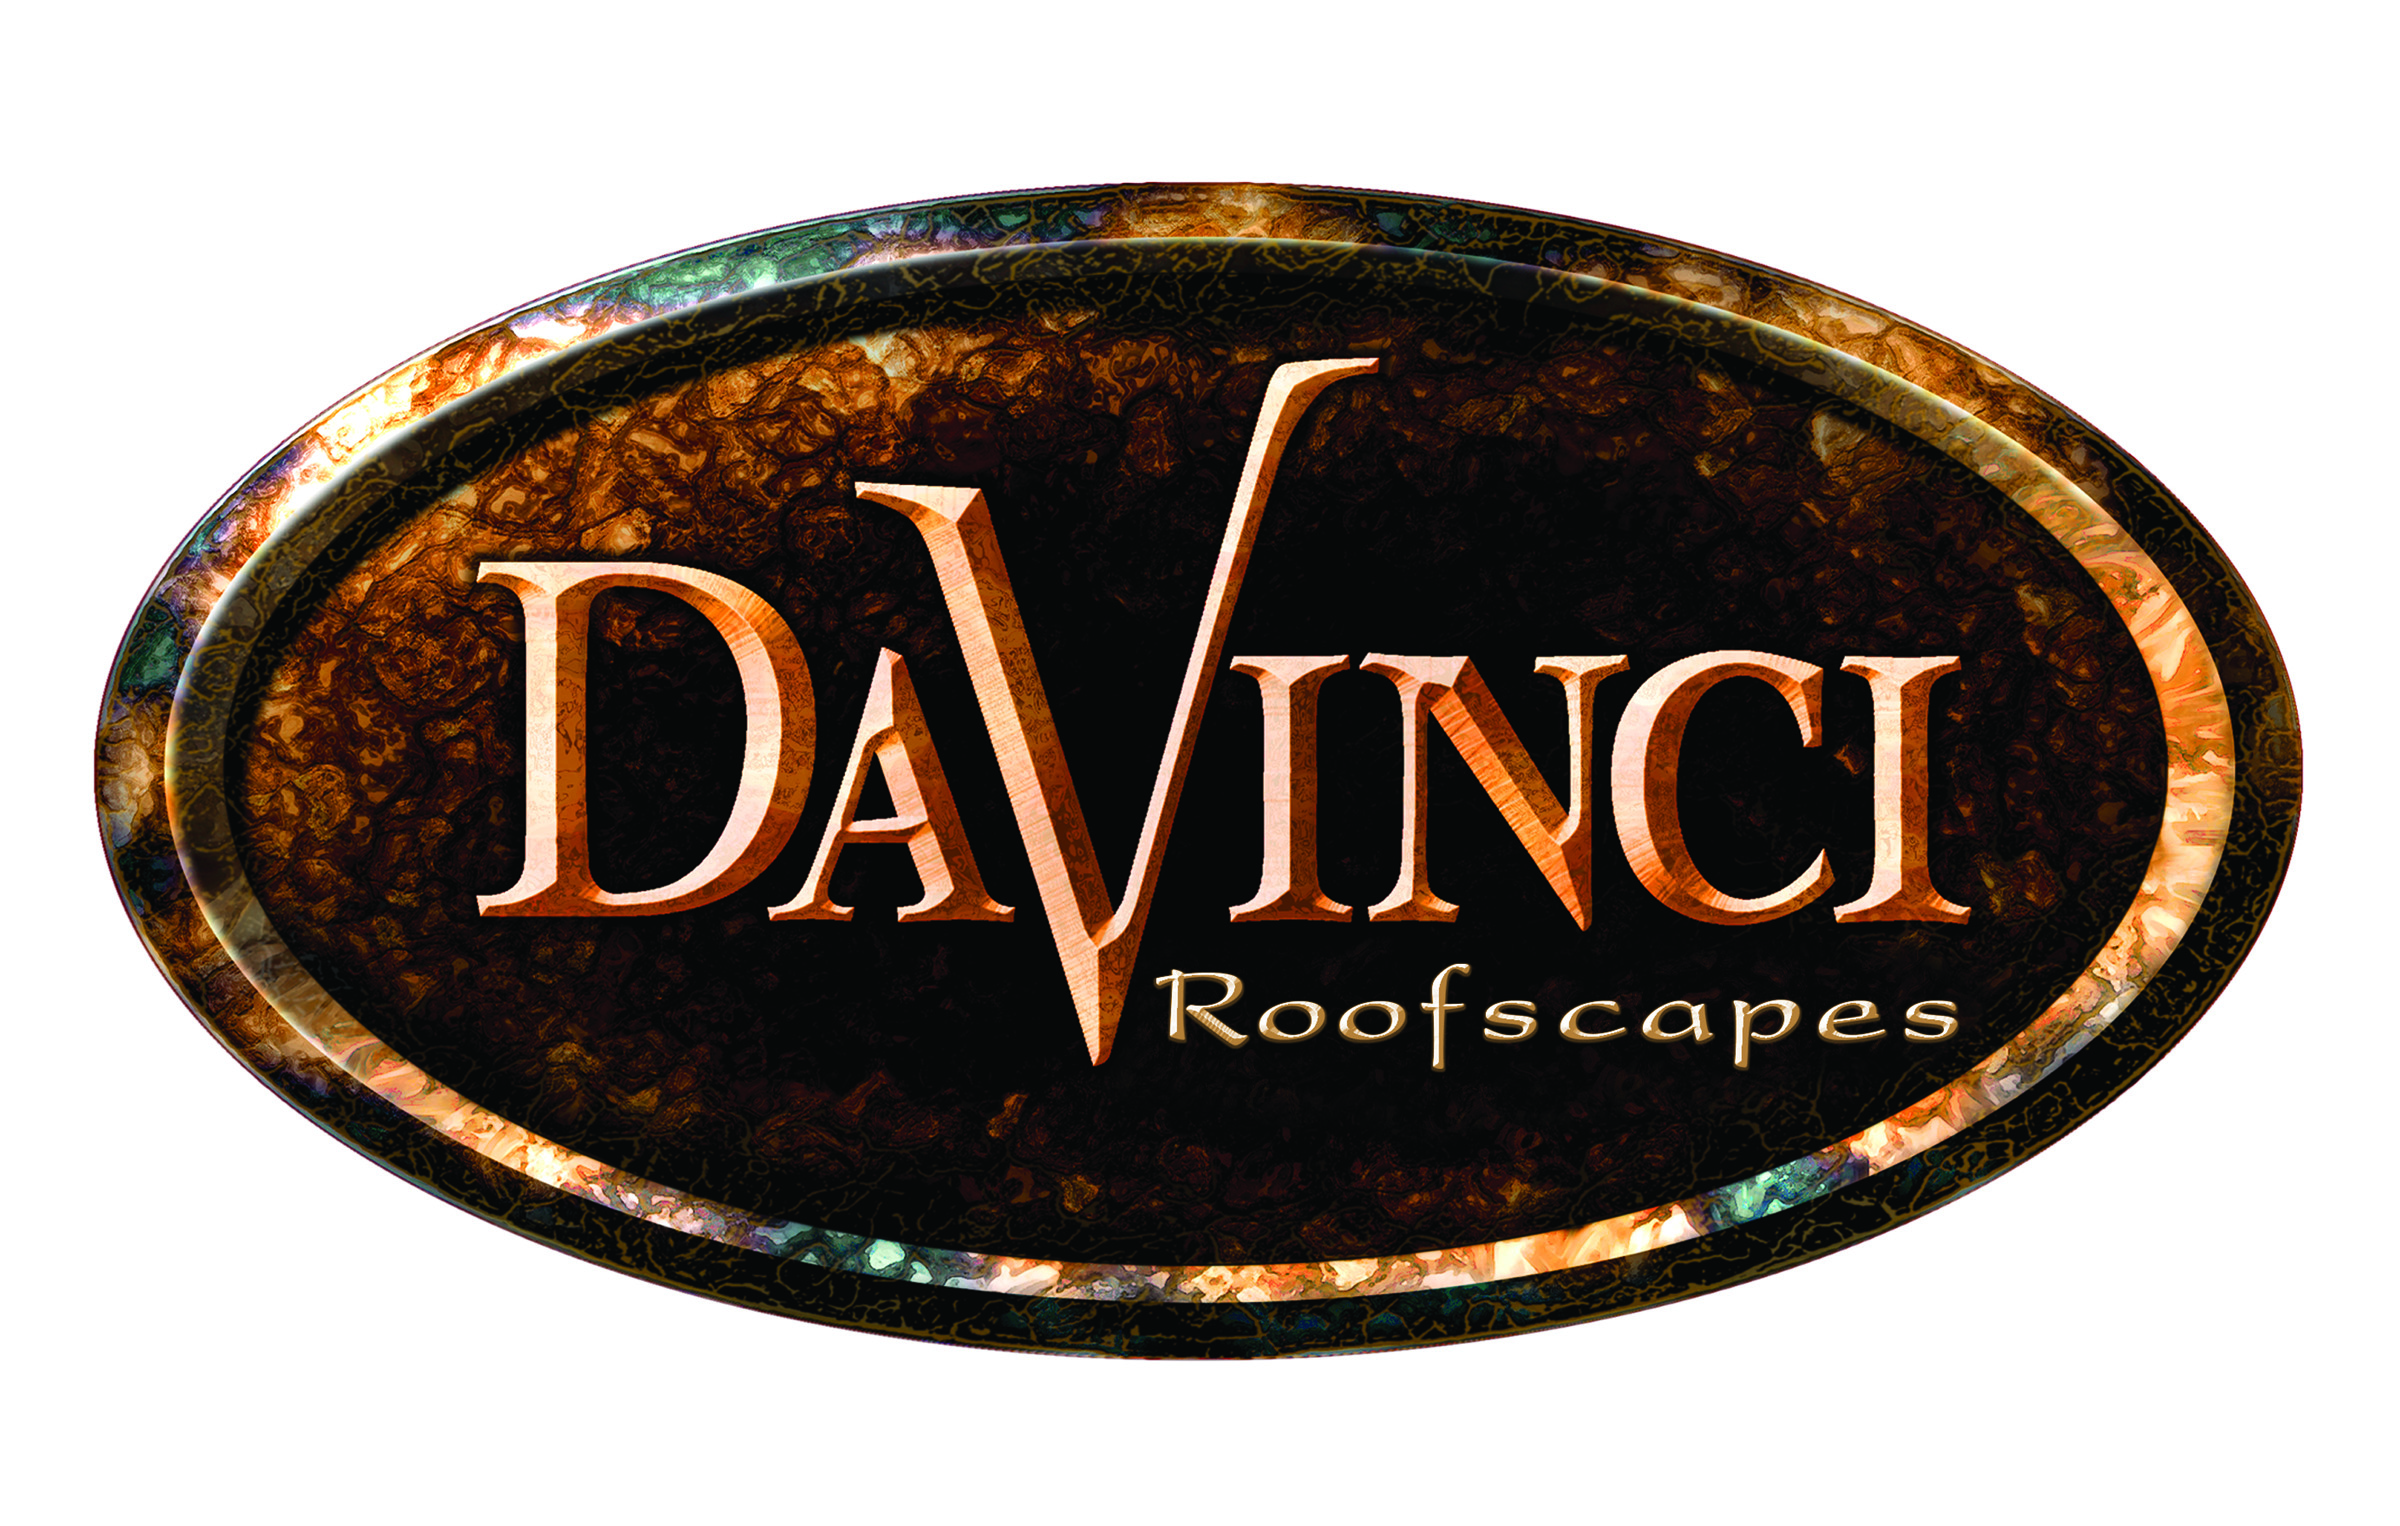 SEP - IndNews-- DaVinci - Cobb Named President and Chief Marketing Officer at DaVinci Roofscapes